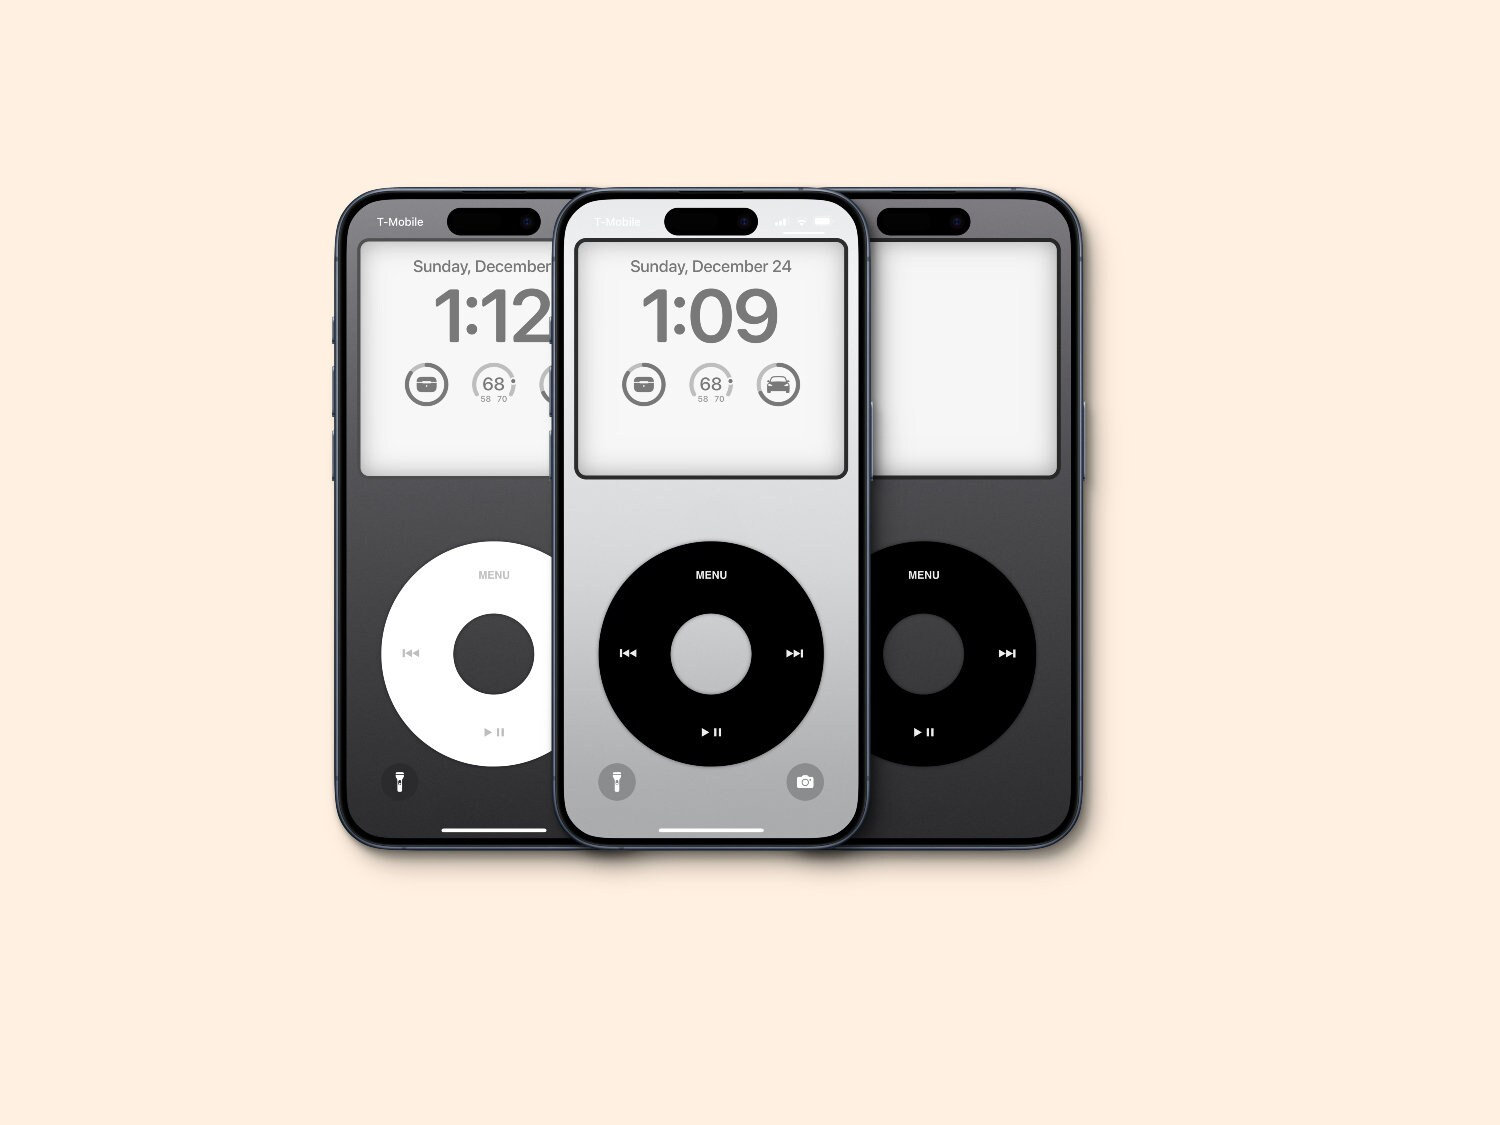 Turn your iPhone into an iPod Classic with these brilliant lock screen  wallpapers